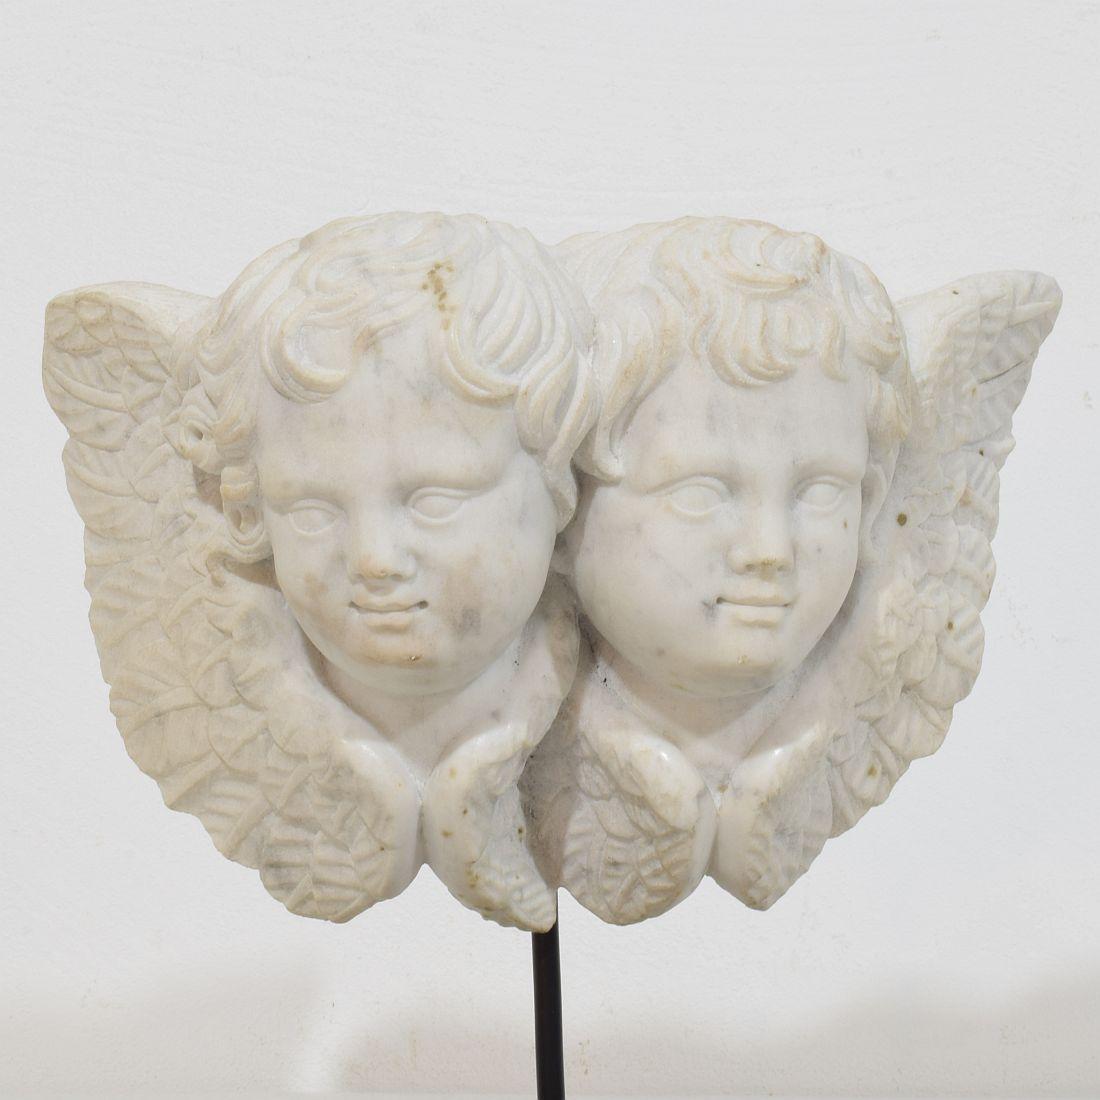 Italian, 18th Century Carved White Marble Winged Double Angel Head Ornament For Sale 5